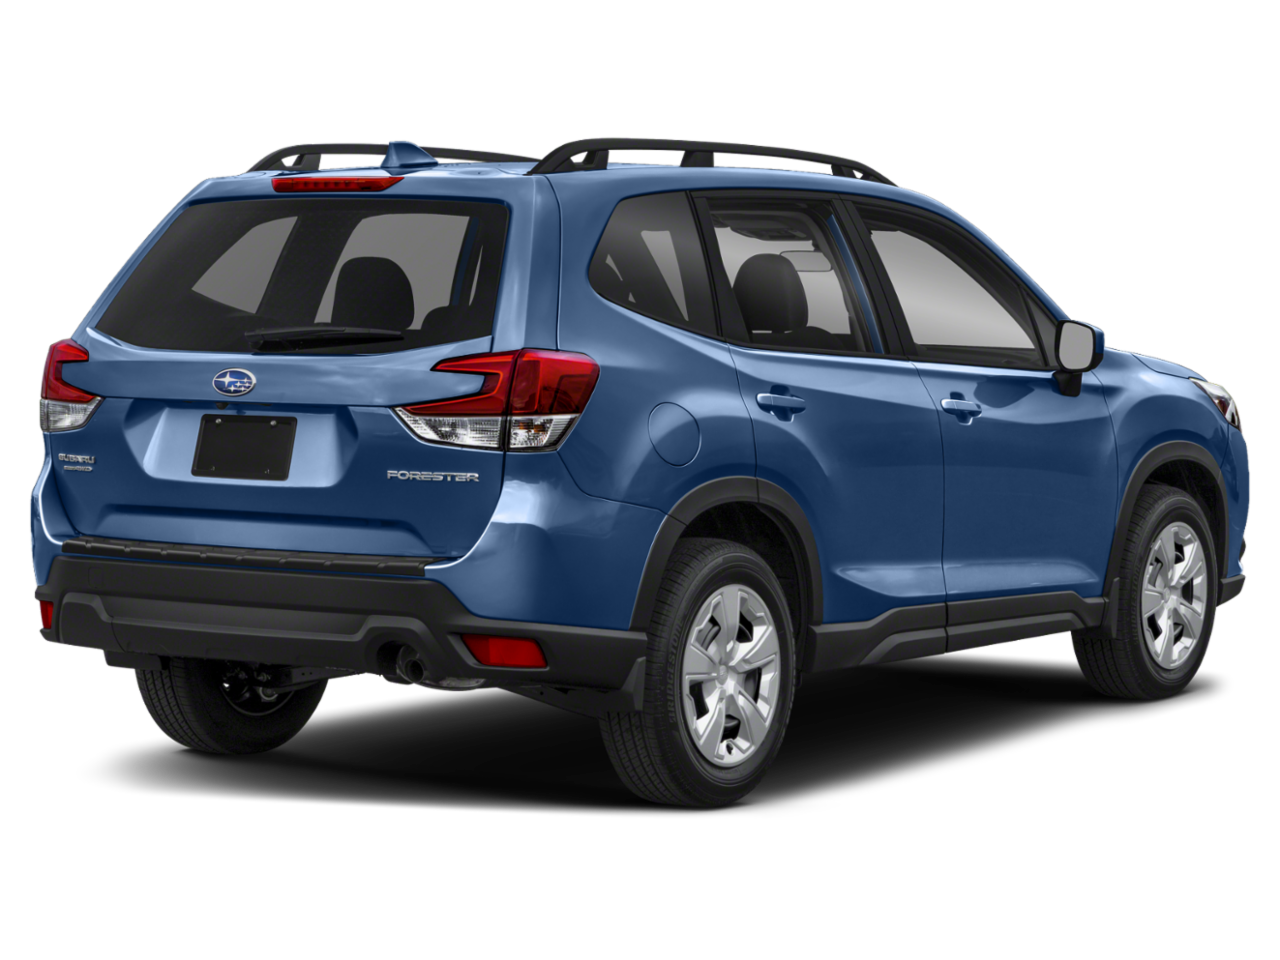 SUBARU Forester Lease Best 0 Down Deals NYC, NJ, CT